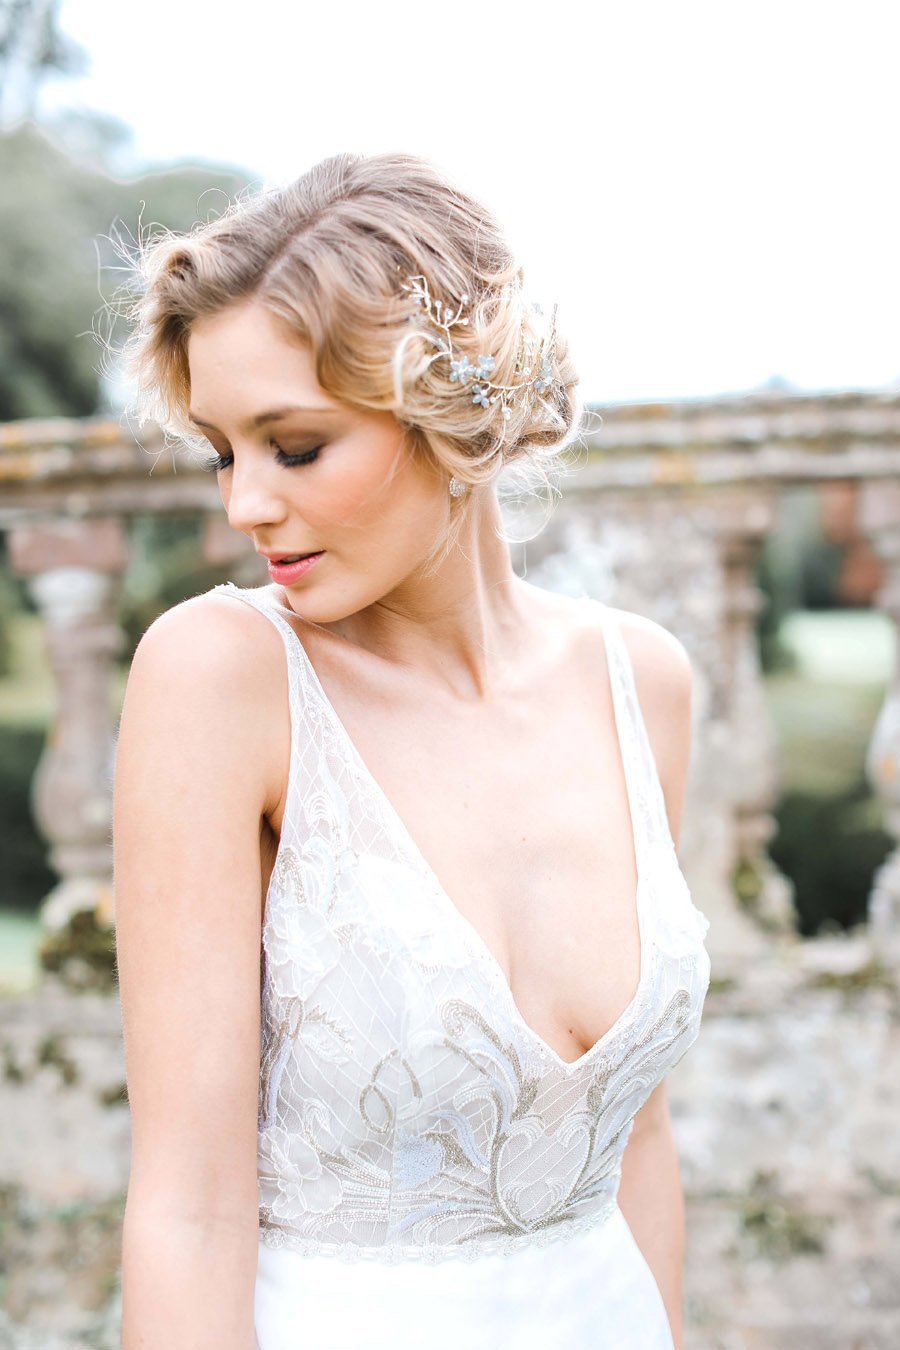 Romantic wedding ideas from Hale Park, photo by Charlotte Wise Photography (10)